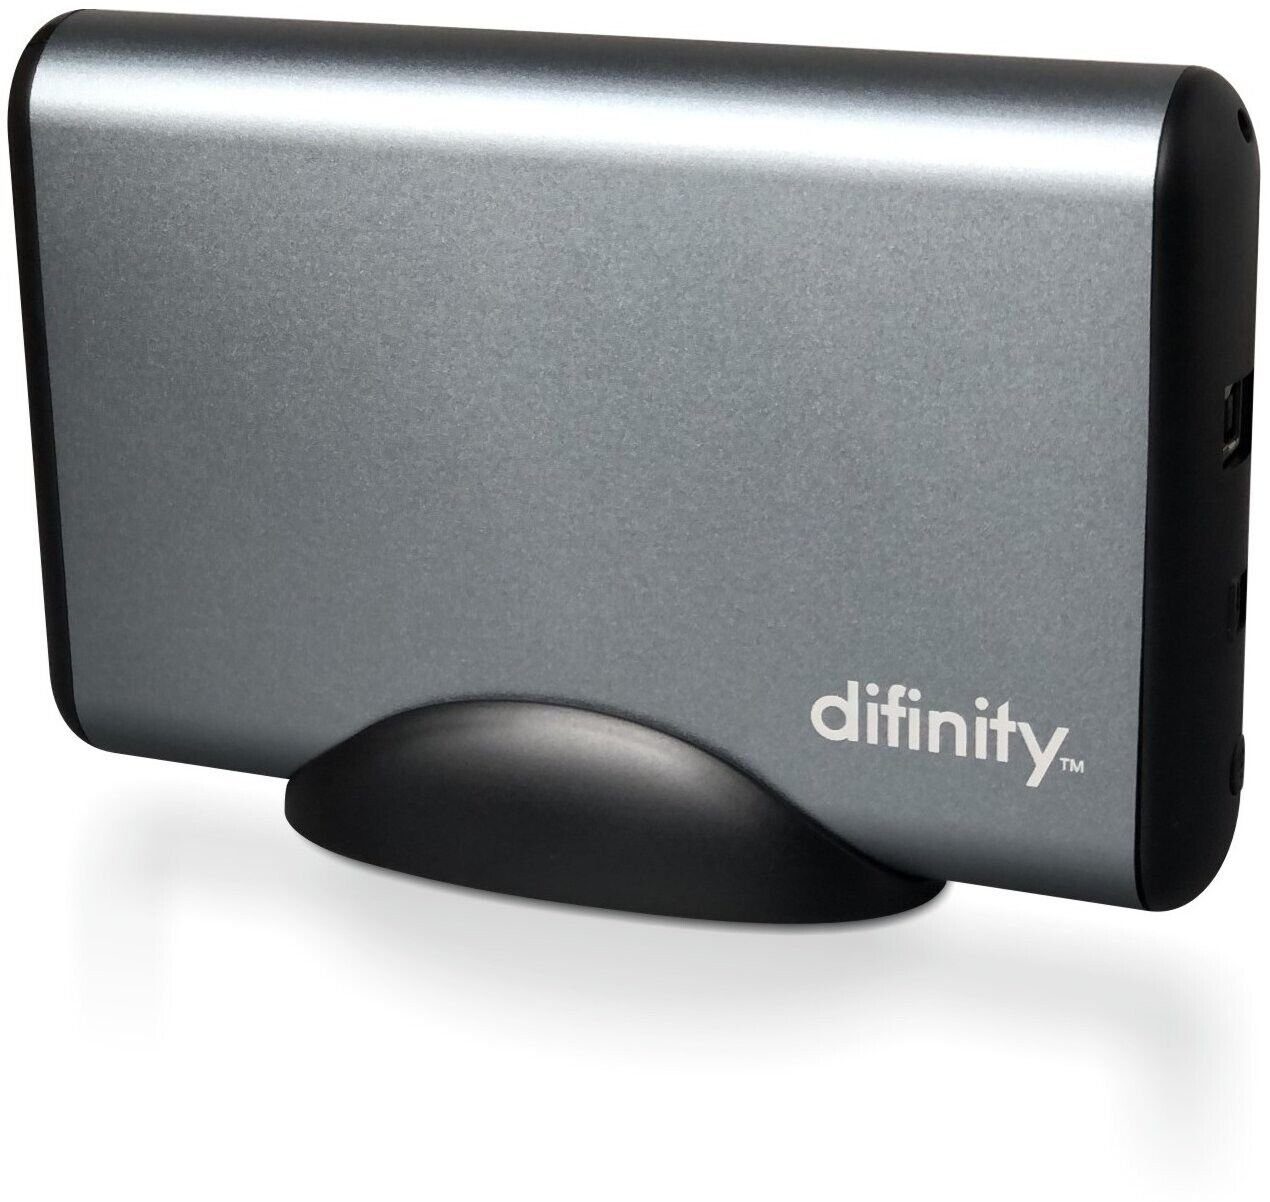 X-HARDWARE Difinity externe HDD-Festplatte (8 TB) 3,5